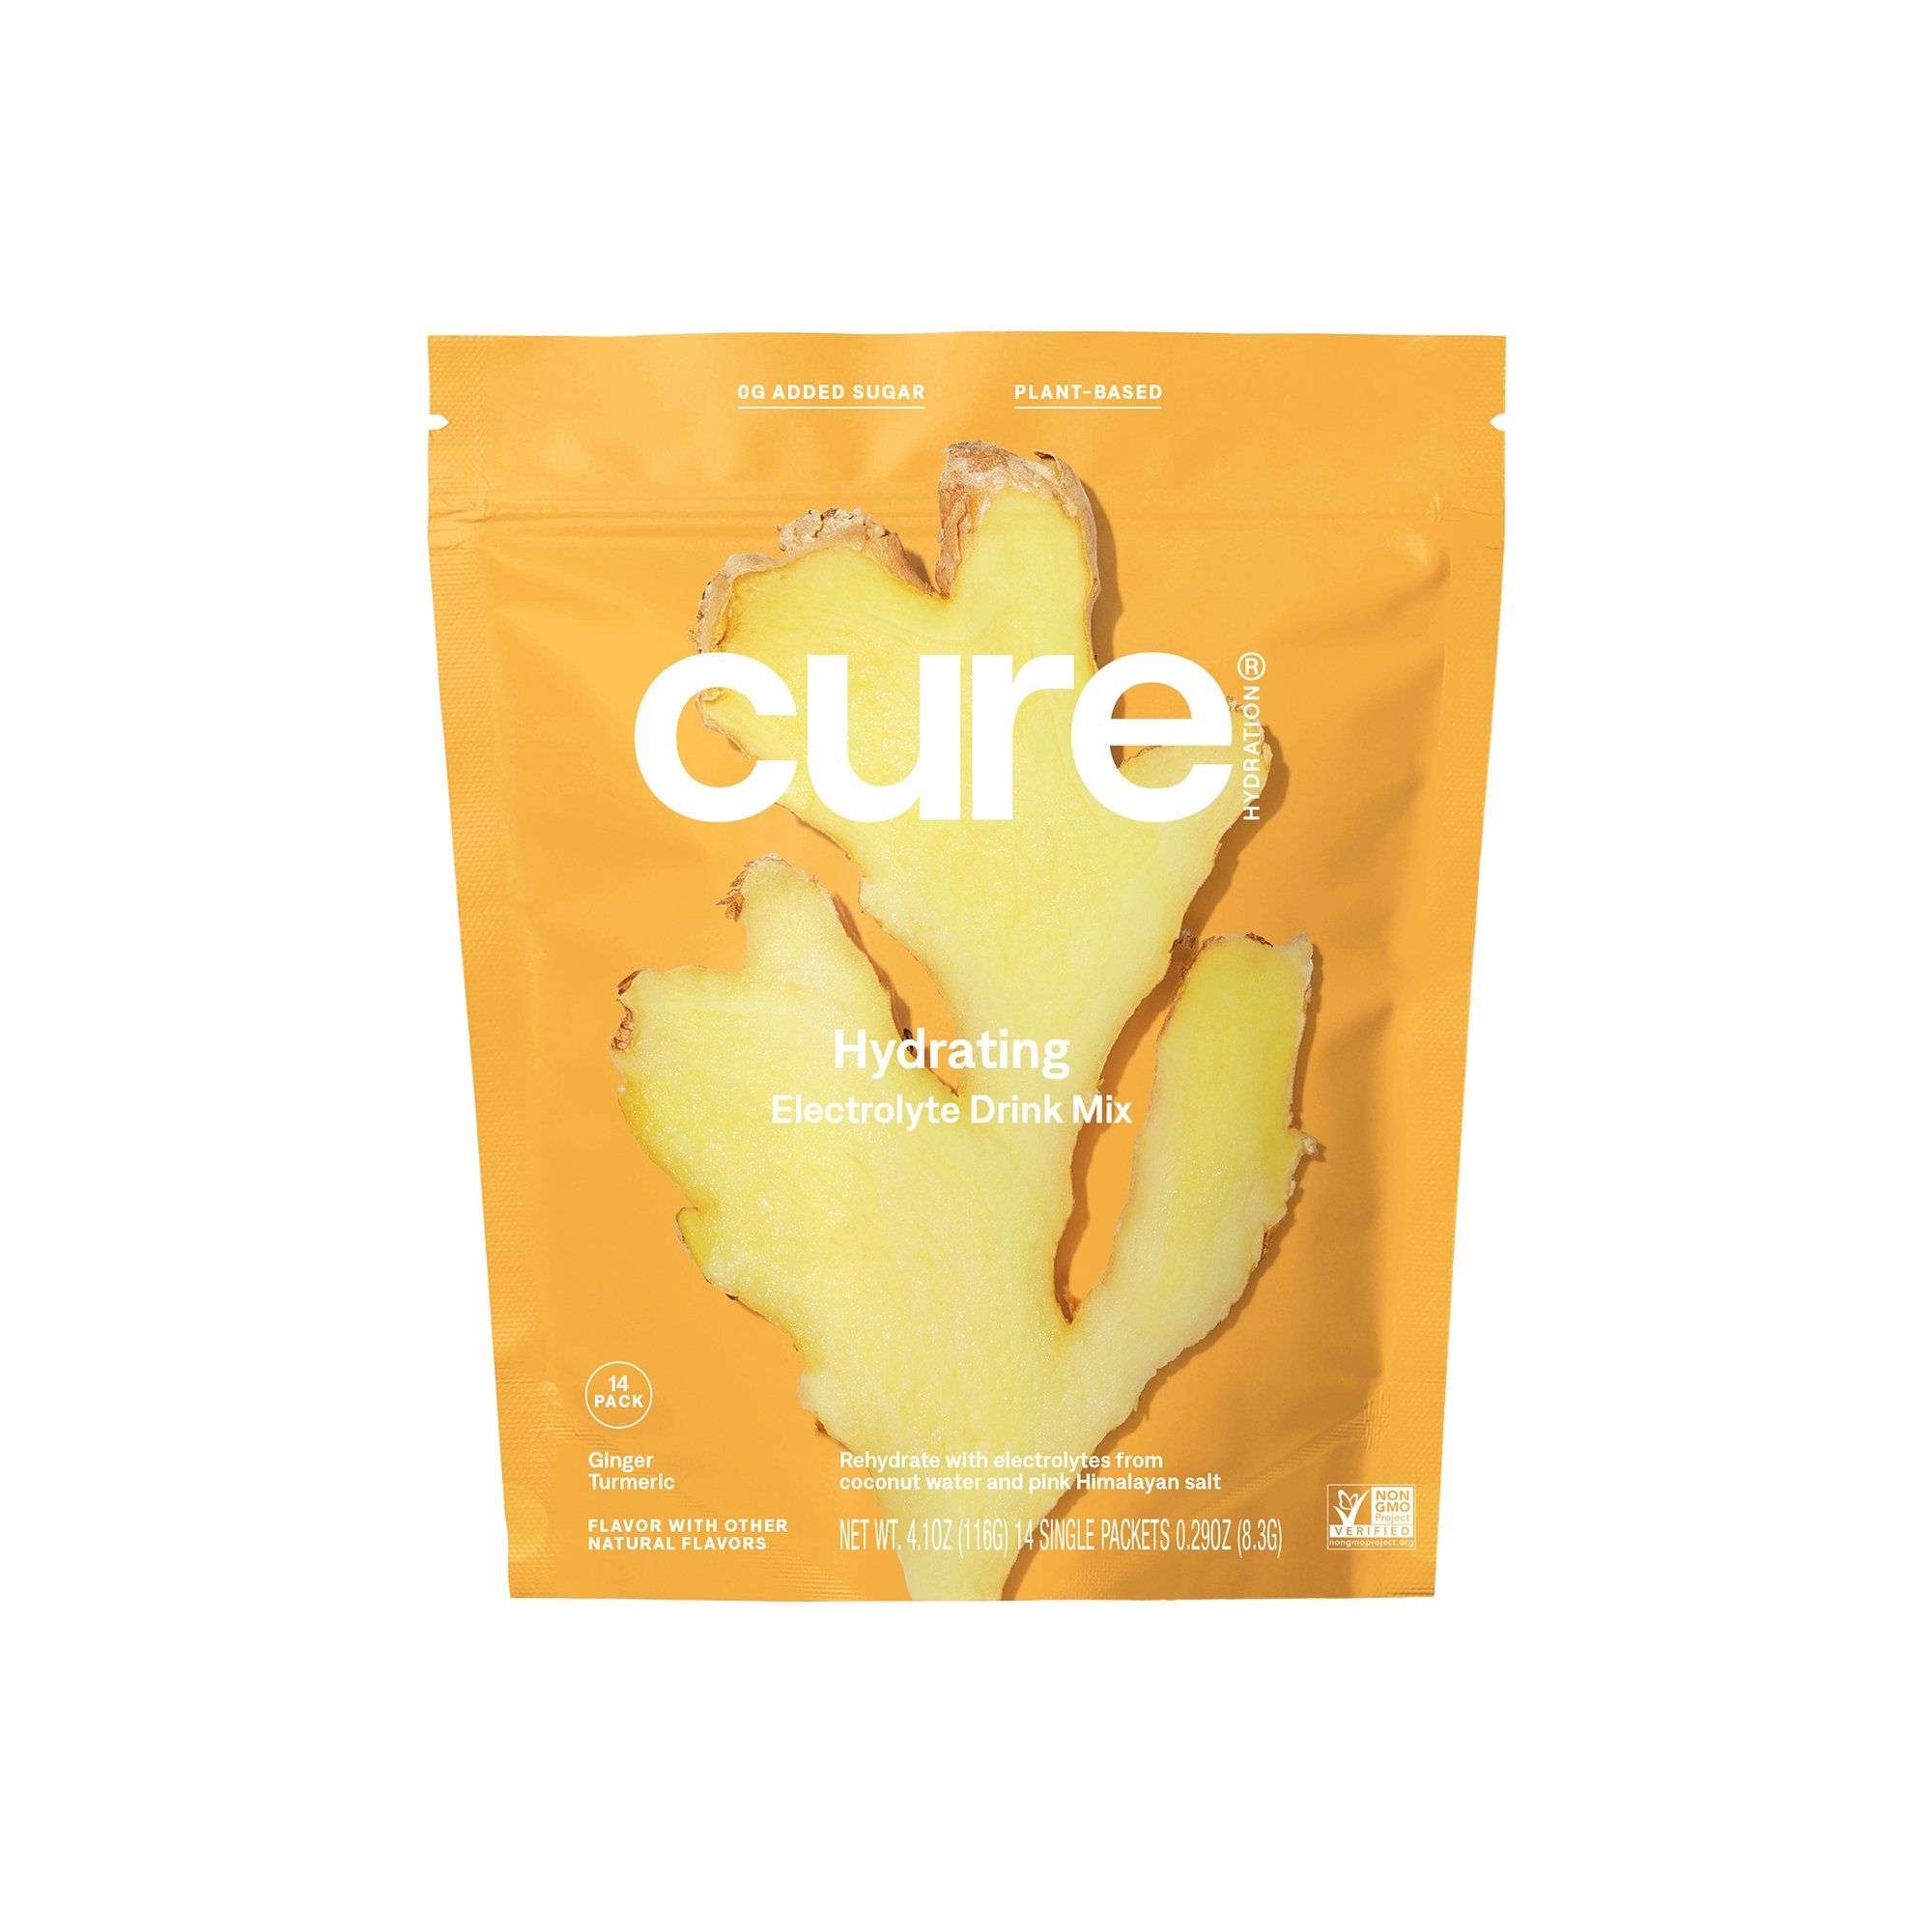 Cure Hydrating Electrolyte Mix, Ginger Turmeric Flavor - 14 Packets